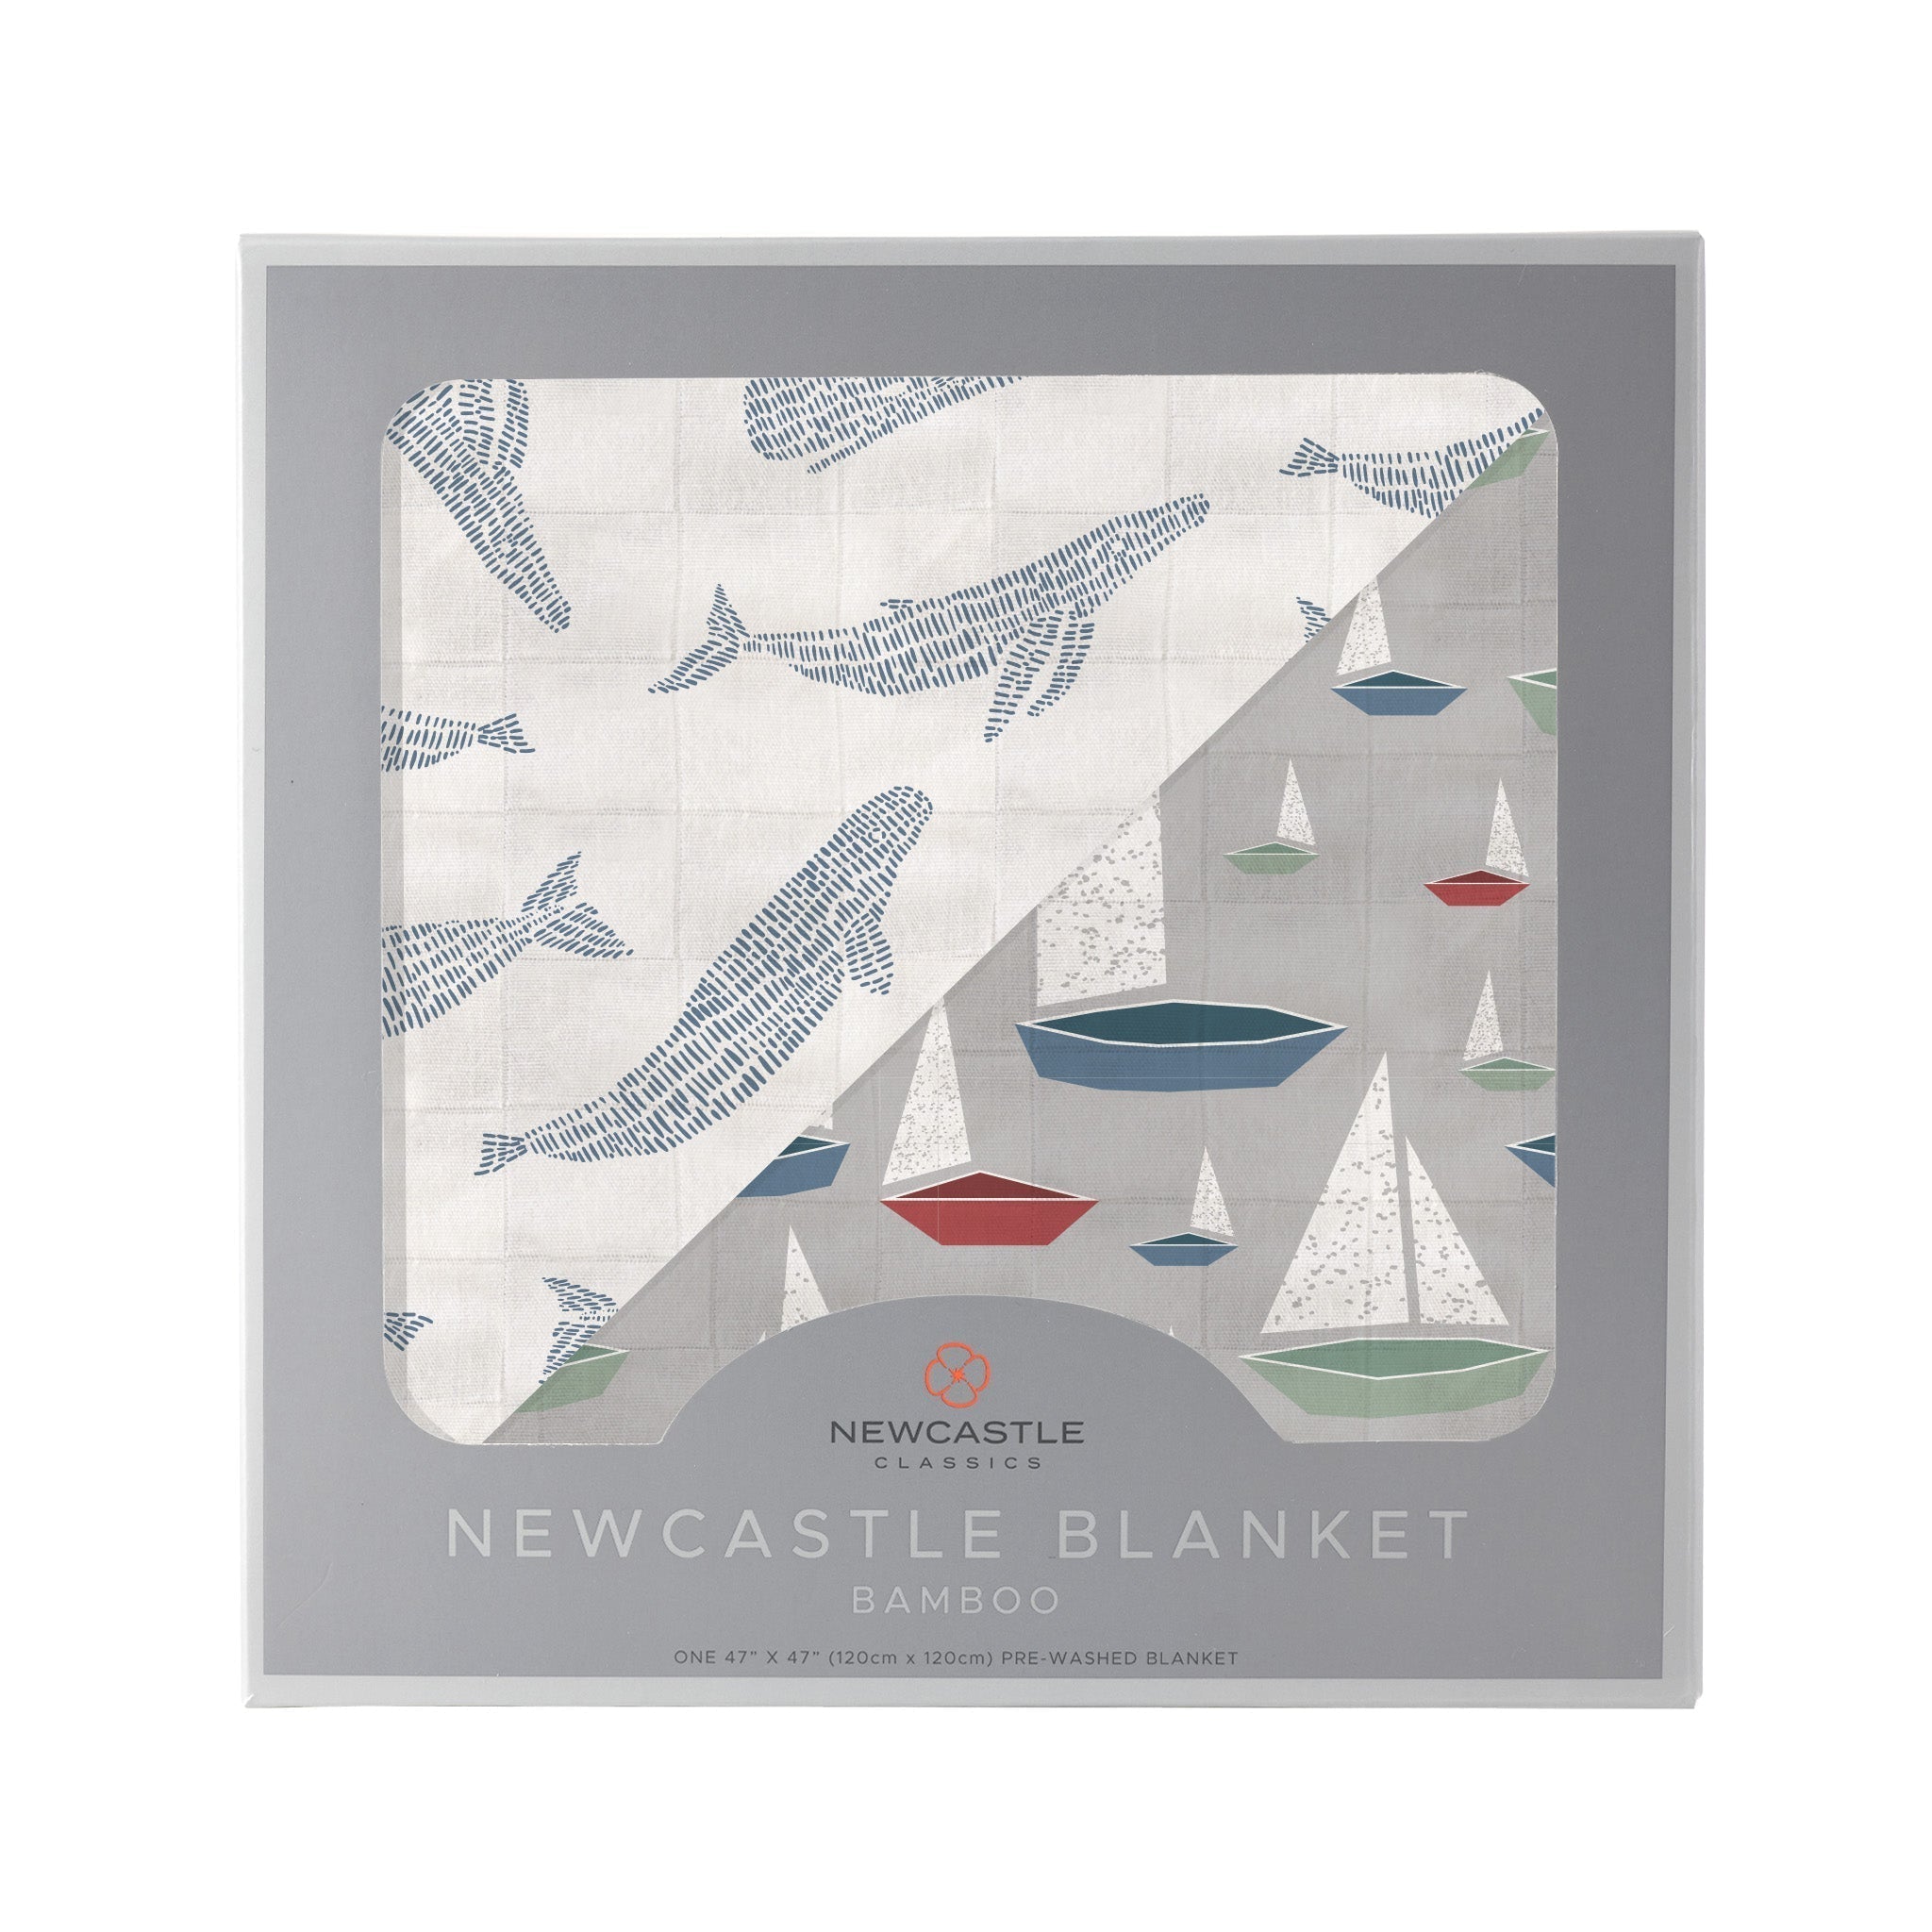 Reversible bamboo blanket for babies